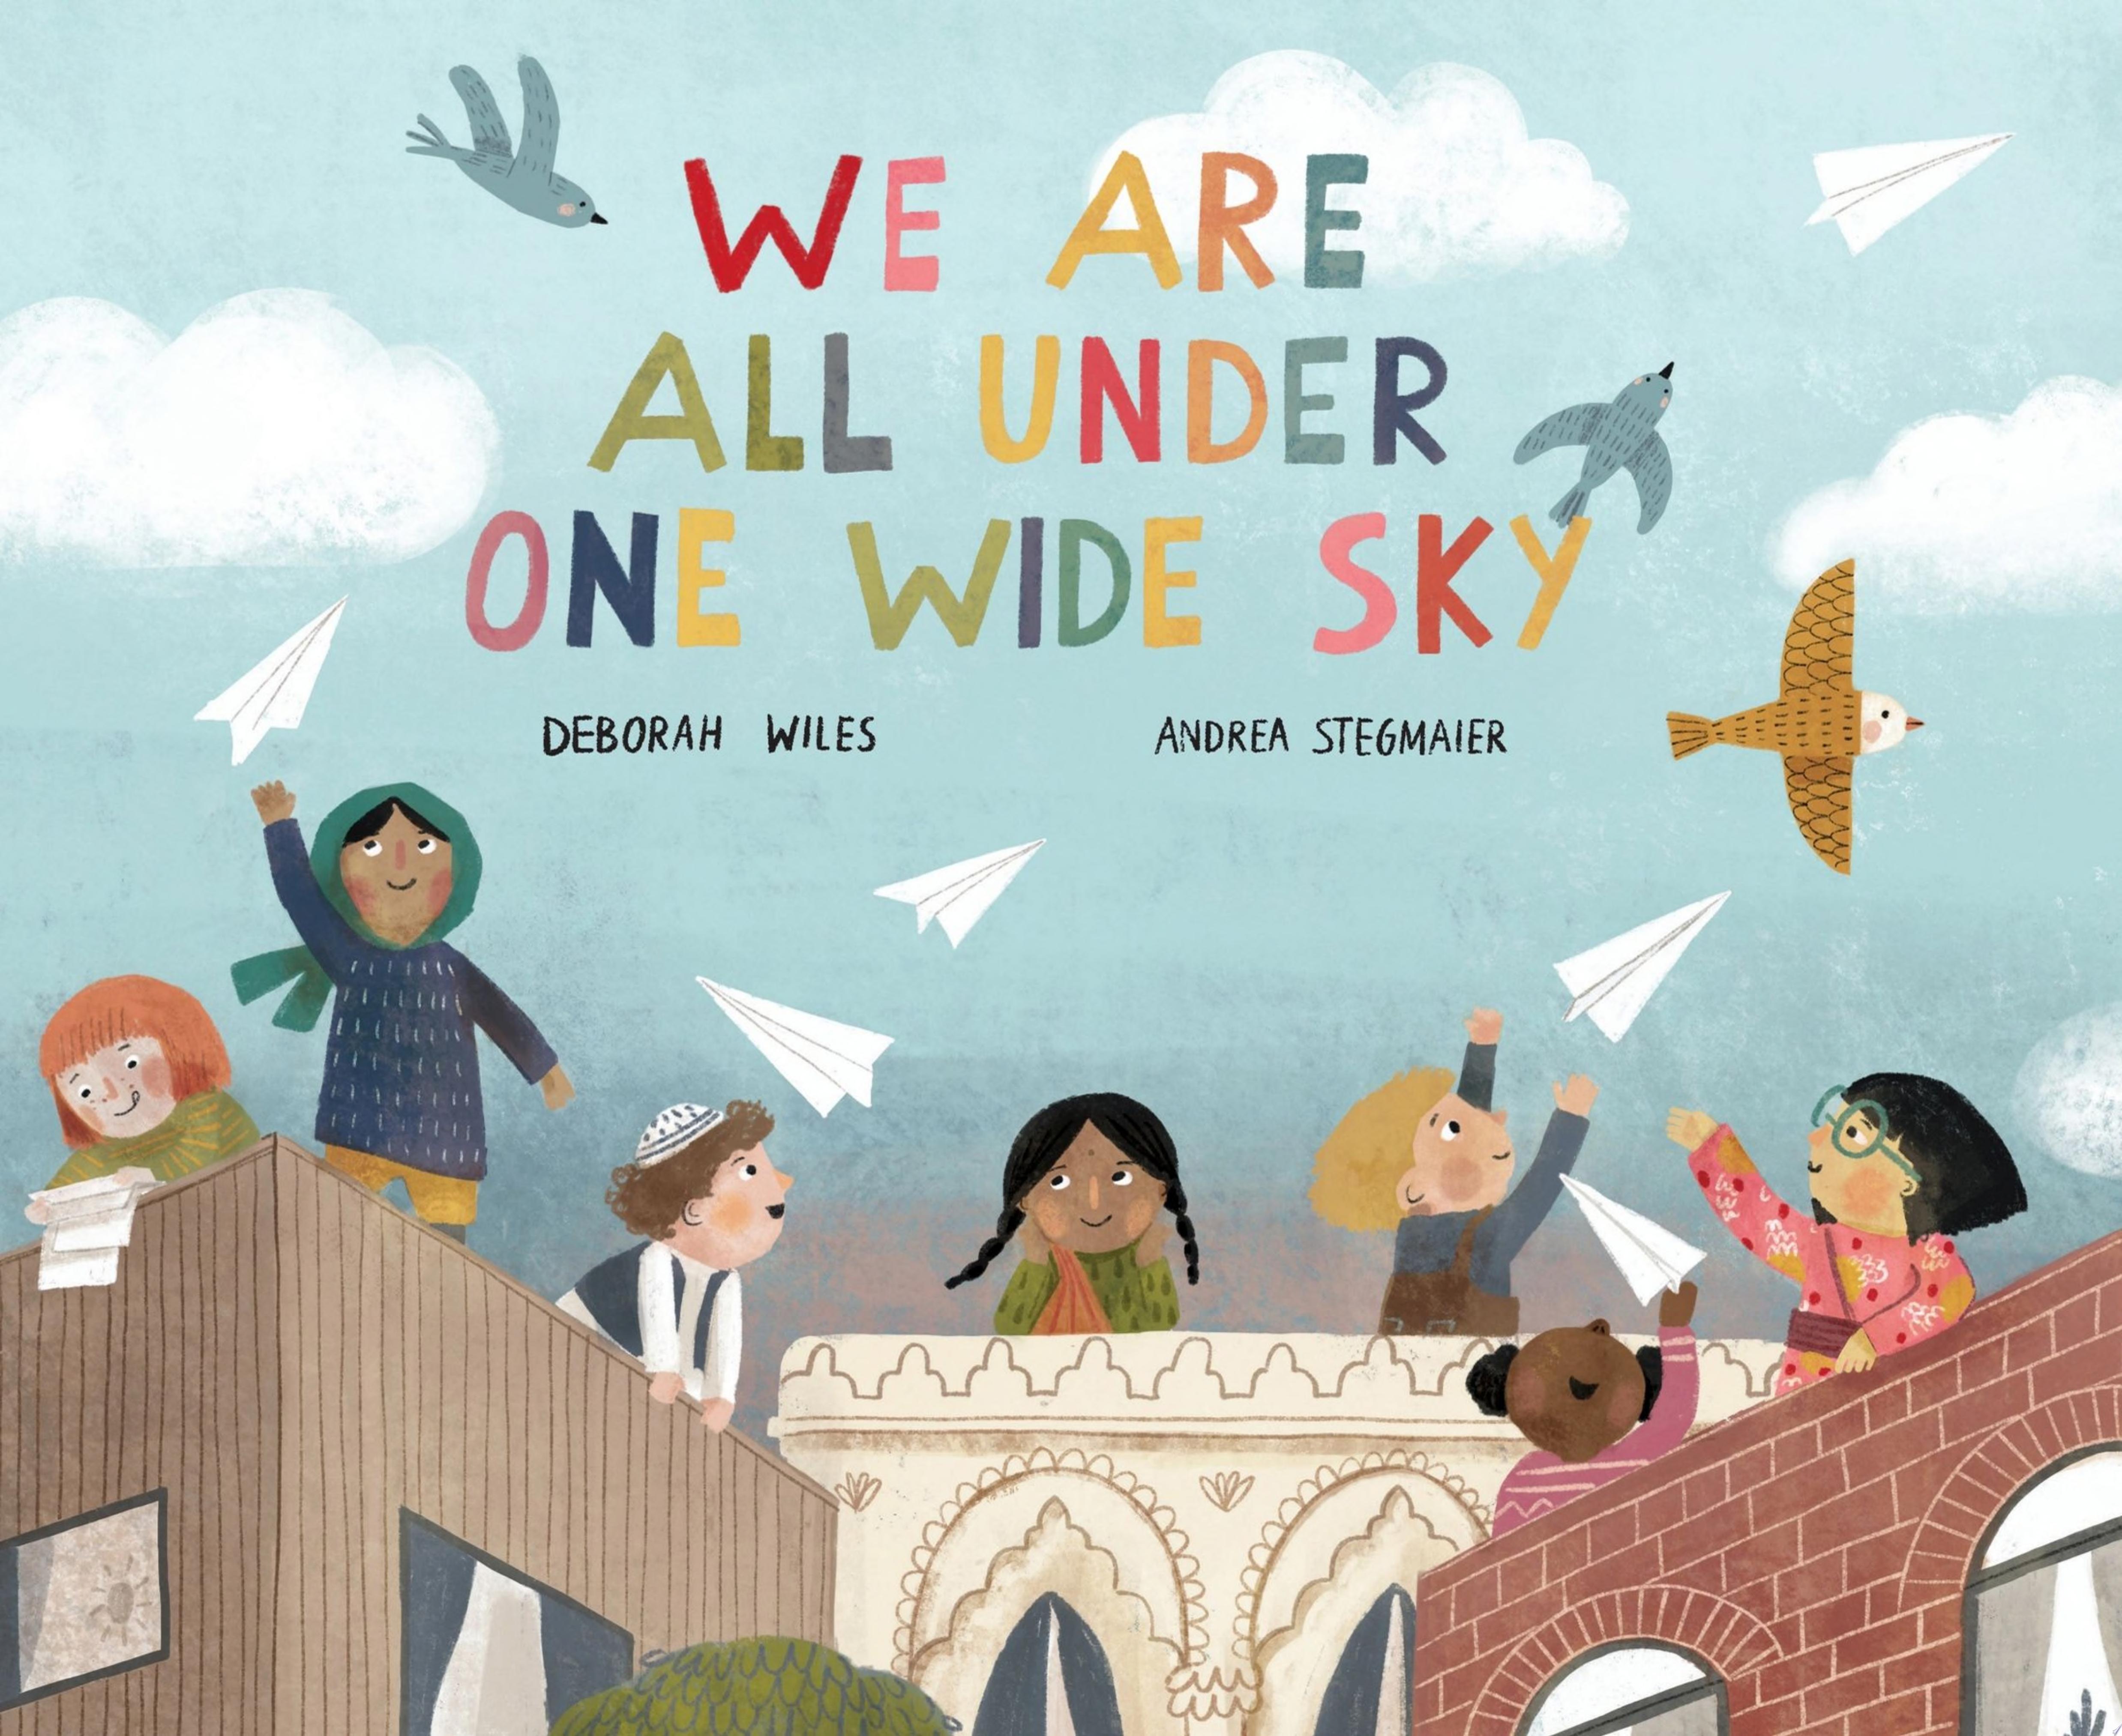 Image for "We Are All Under One Wide Sky"